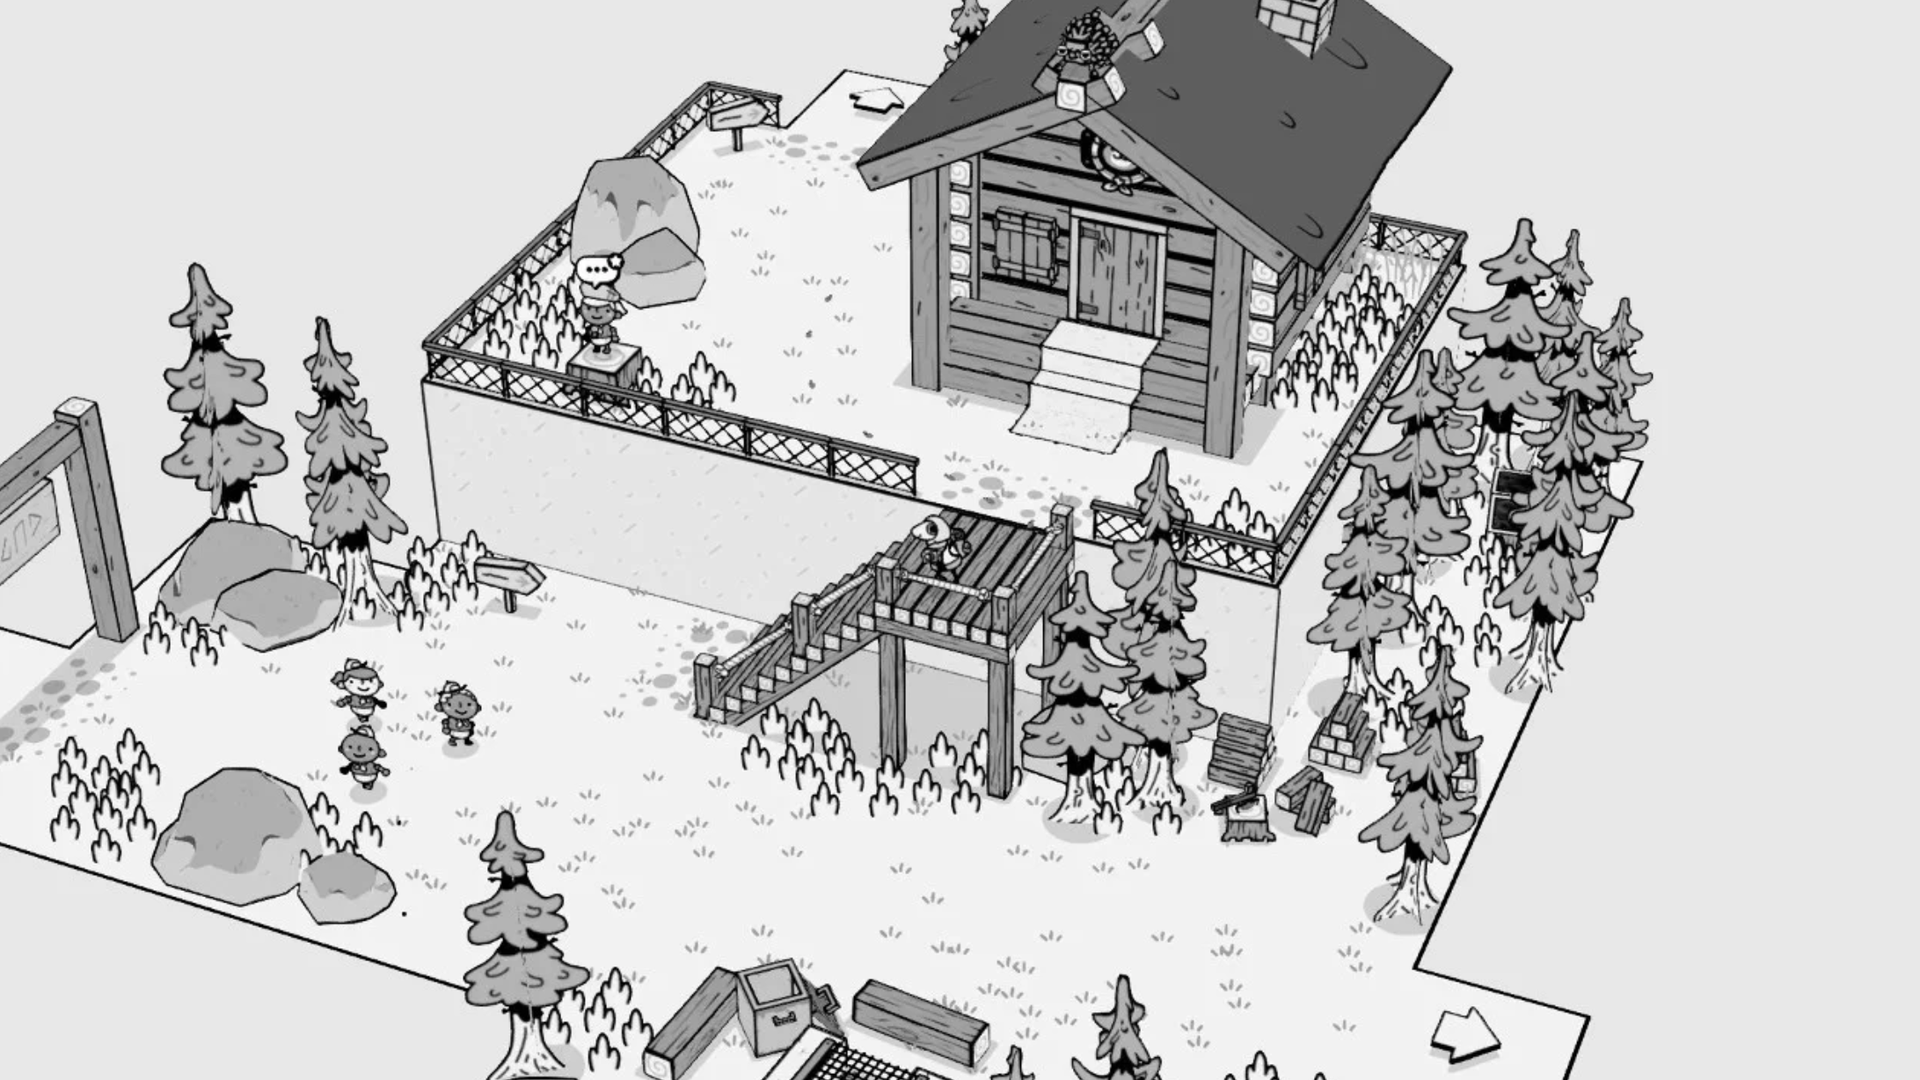 Video game screenshot of a black and white village